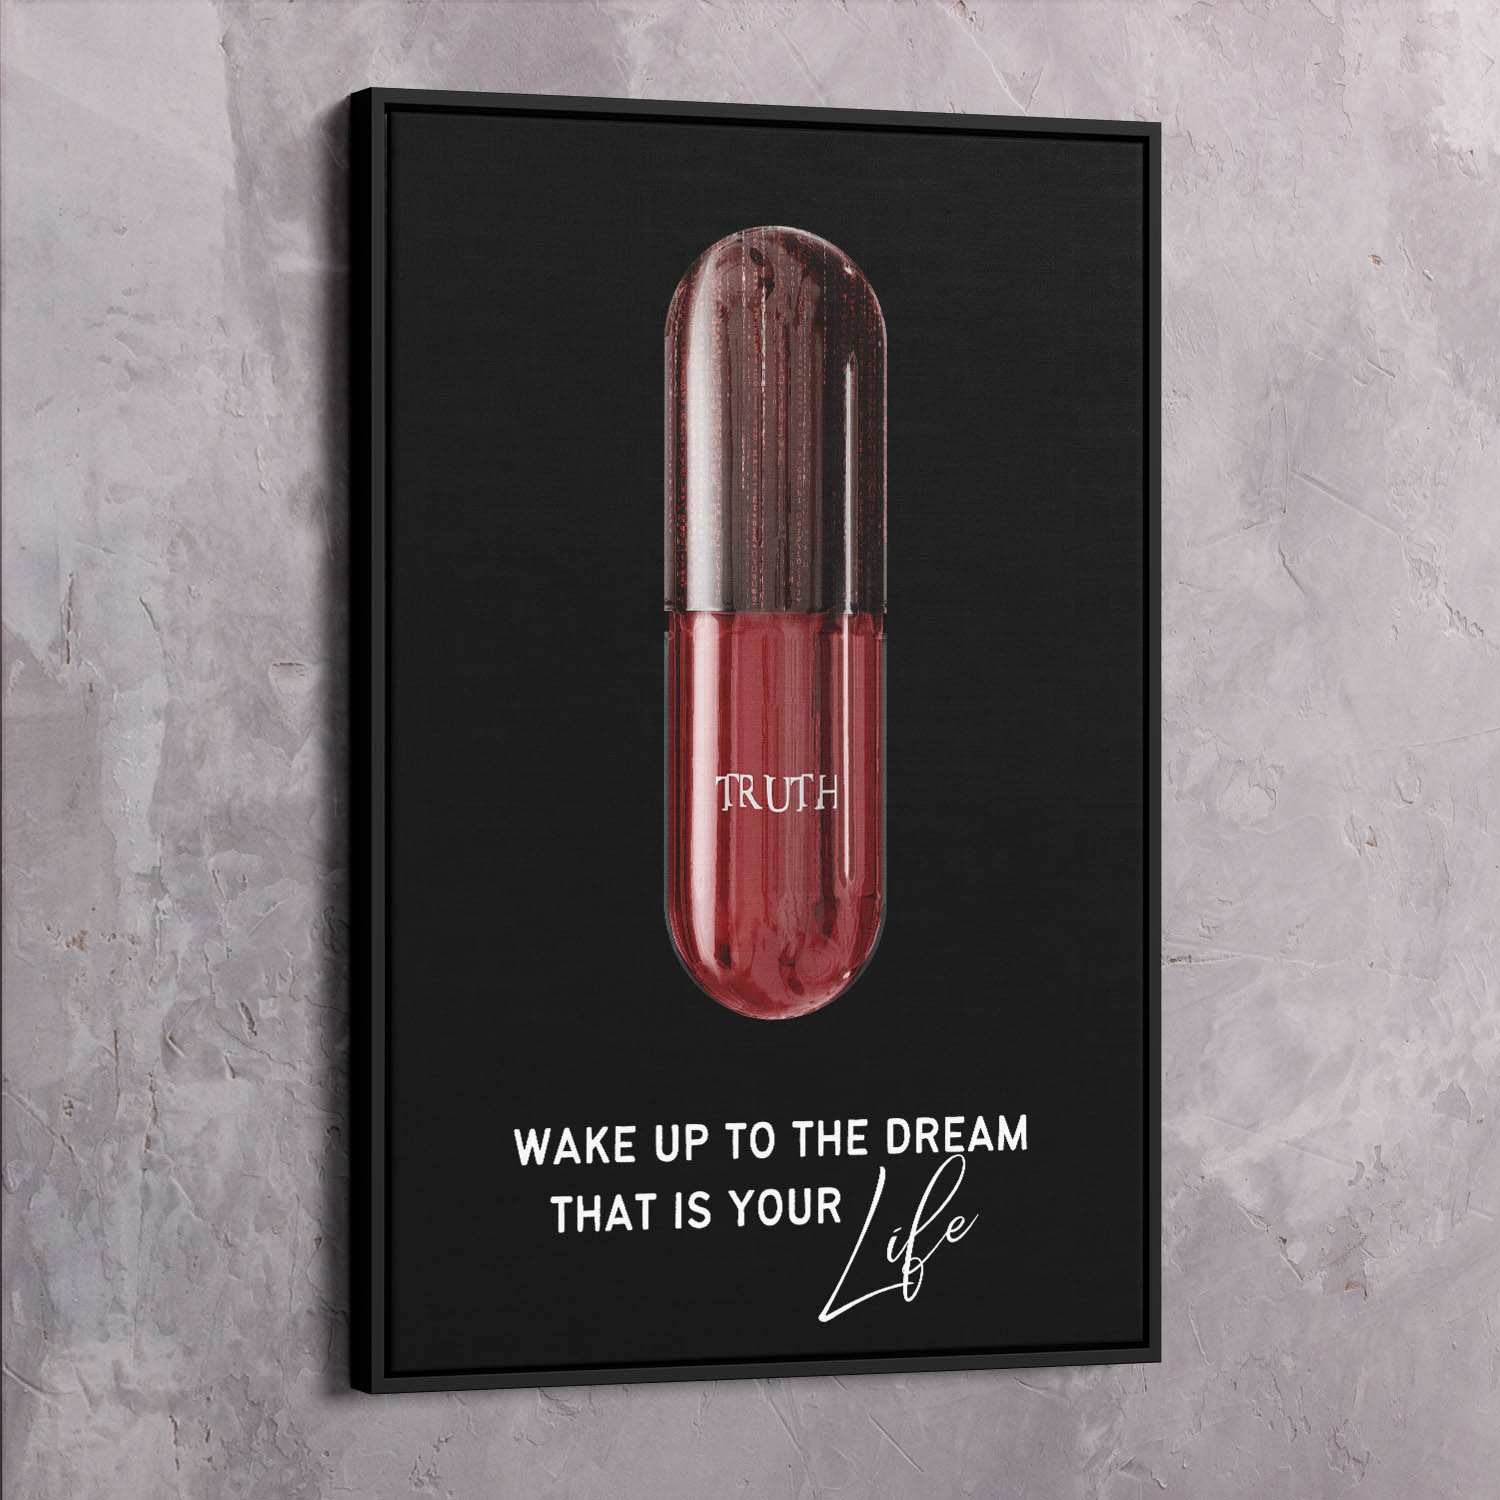 Red Pill - Wake Up to the Dream - Matrix Inspired Wall Art | Inspirational Wall Art Motivational Wall Art Quotes Office Art | ImpaktMaker Exclusive Canvas Art Portrait